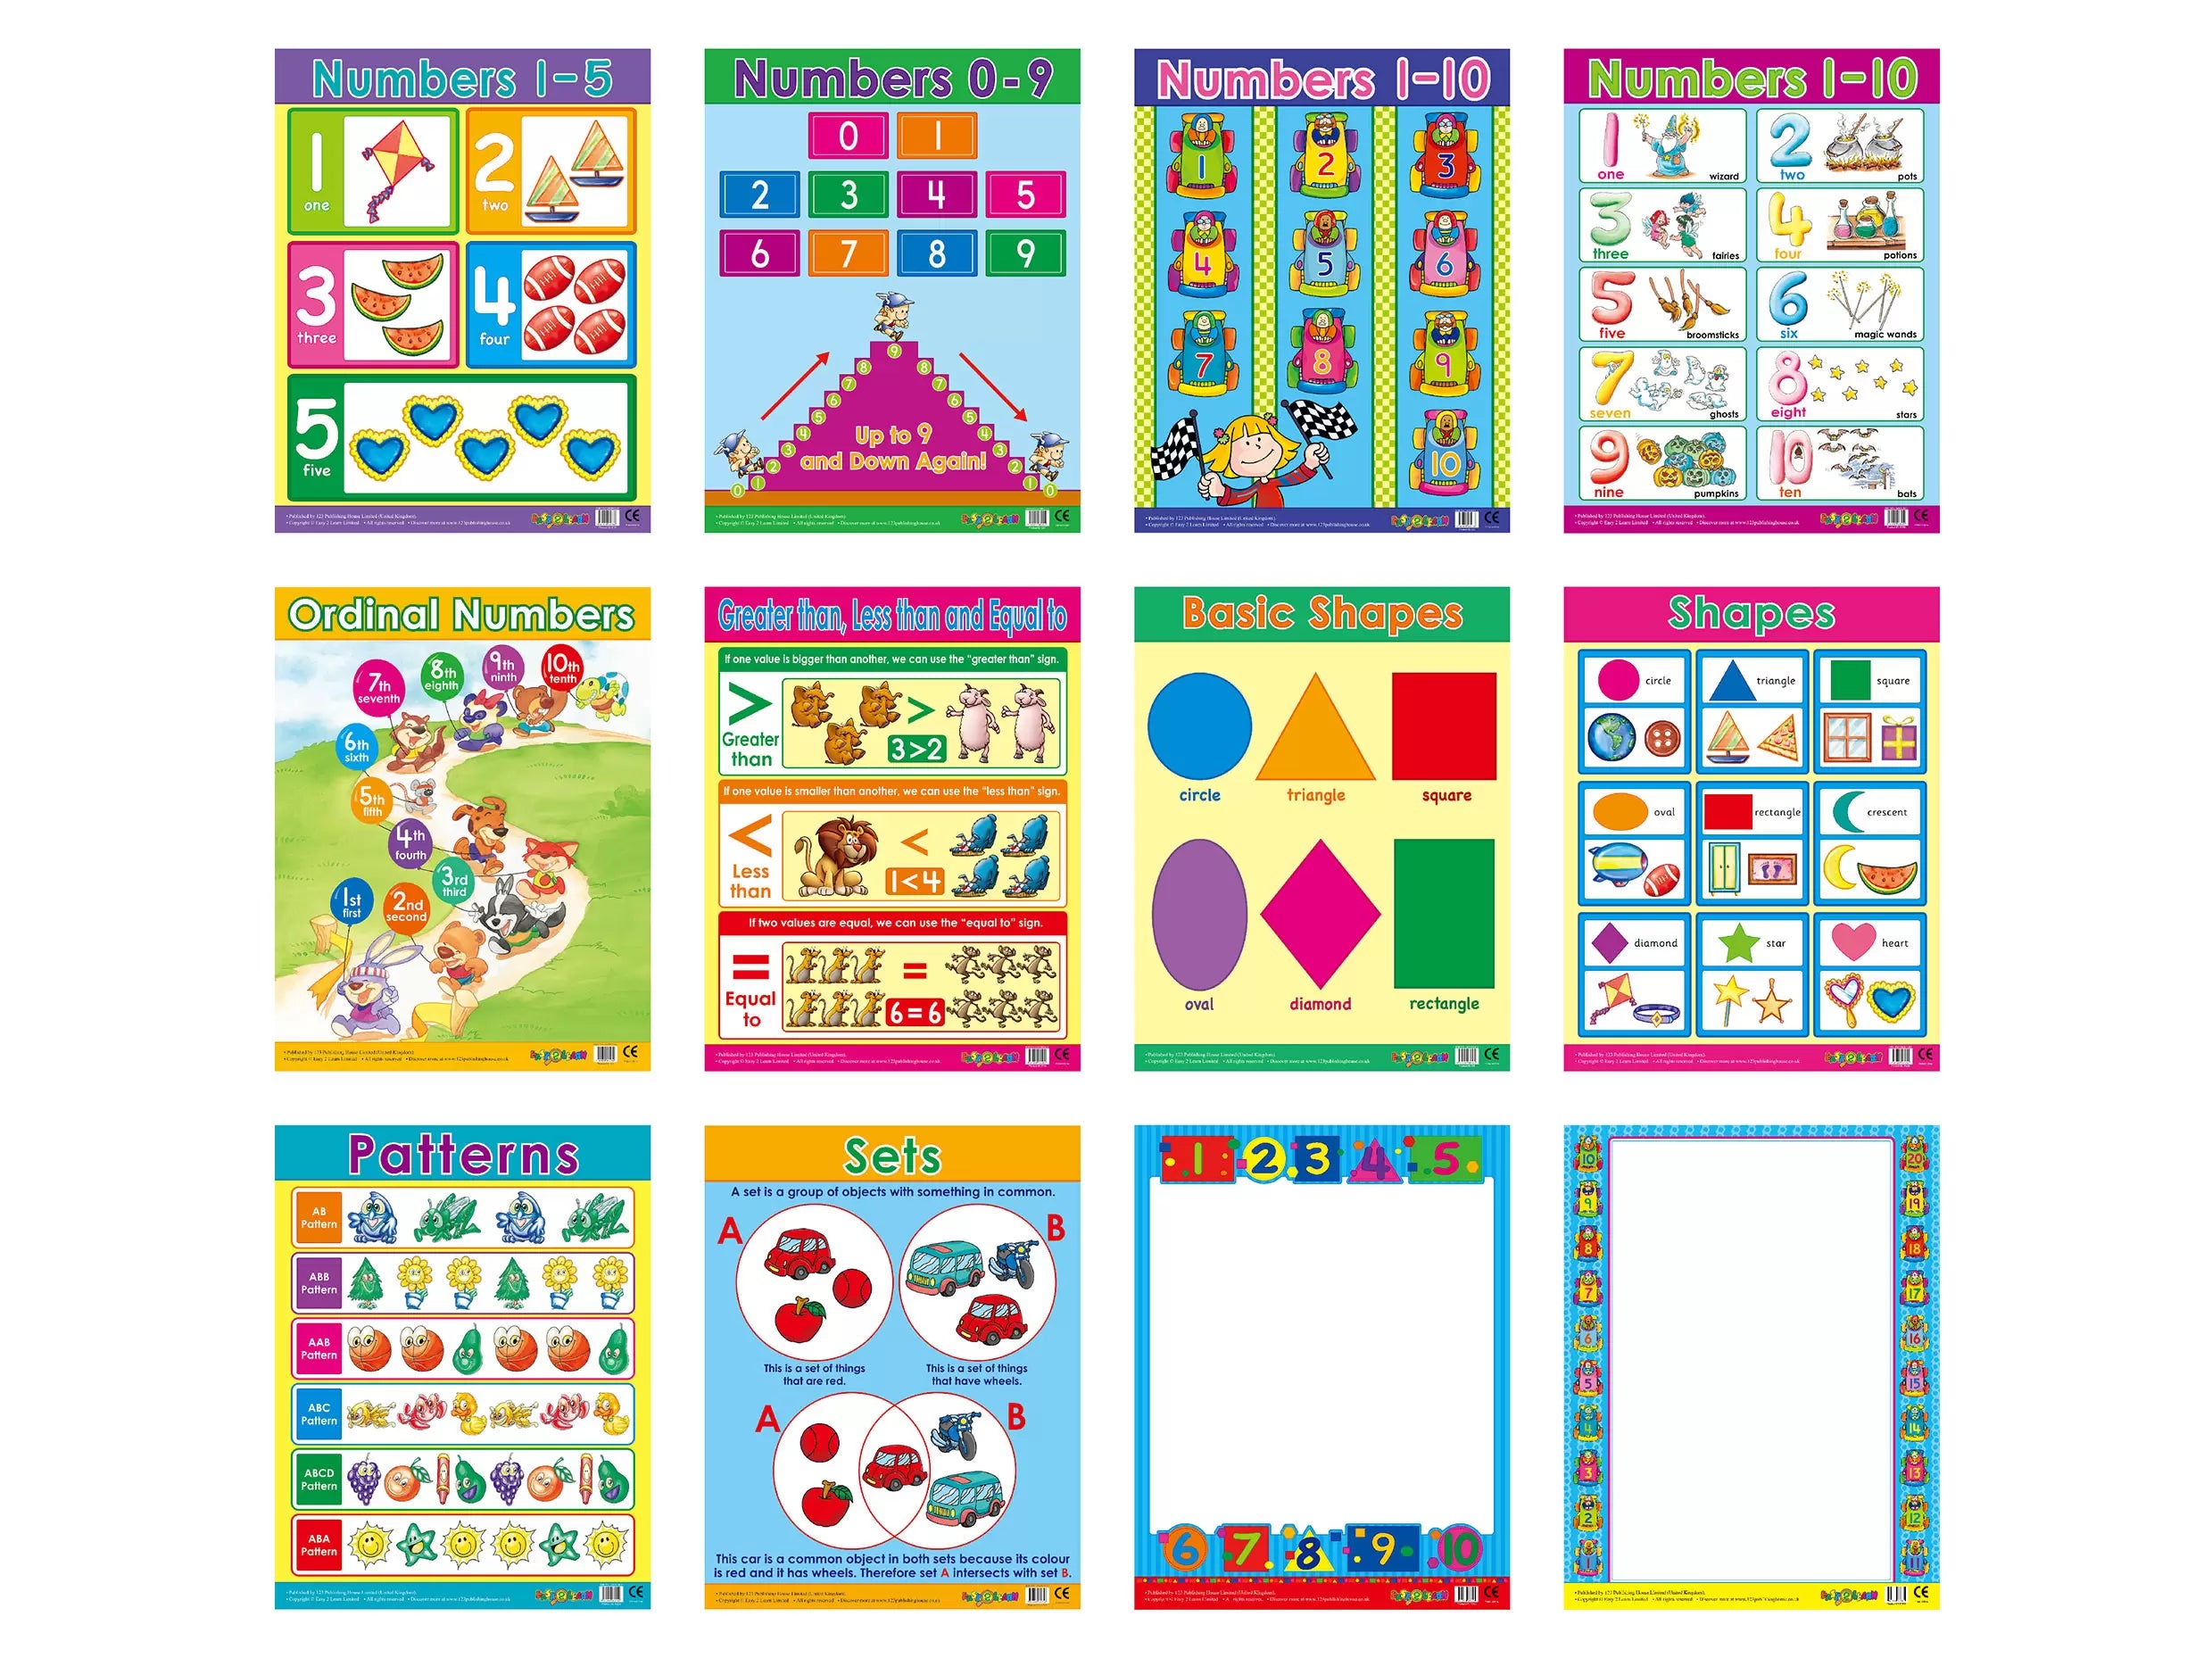 Early Maths (12 Wall Charts) - Educational Wall Chart Pack in English